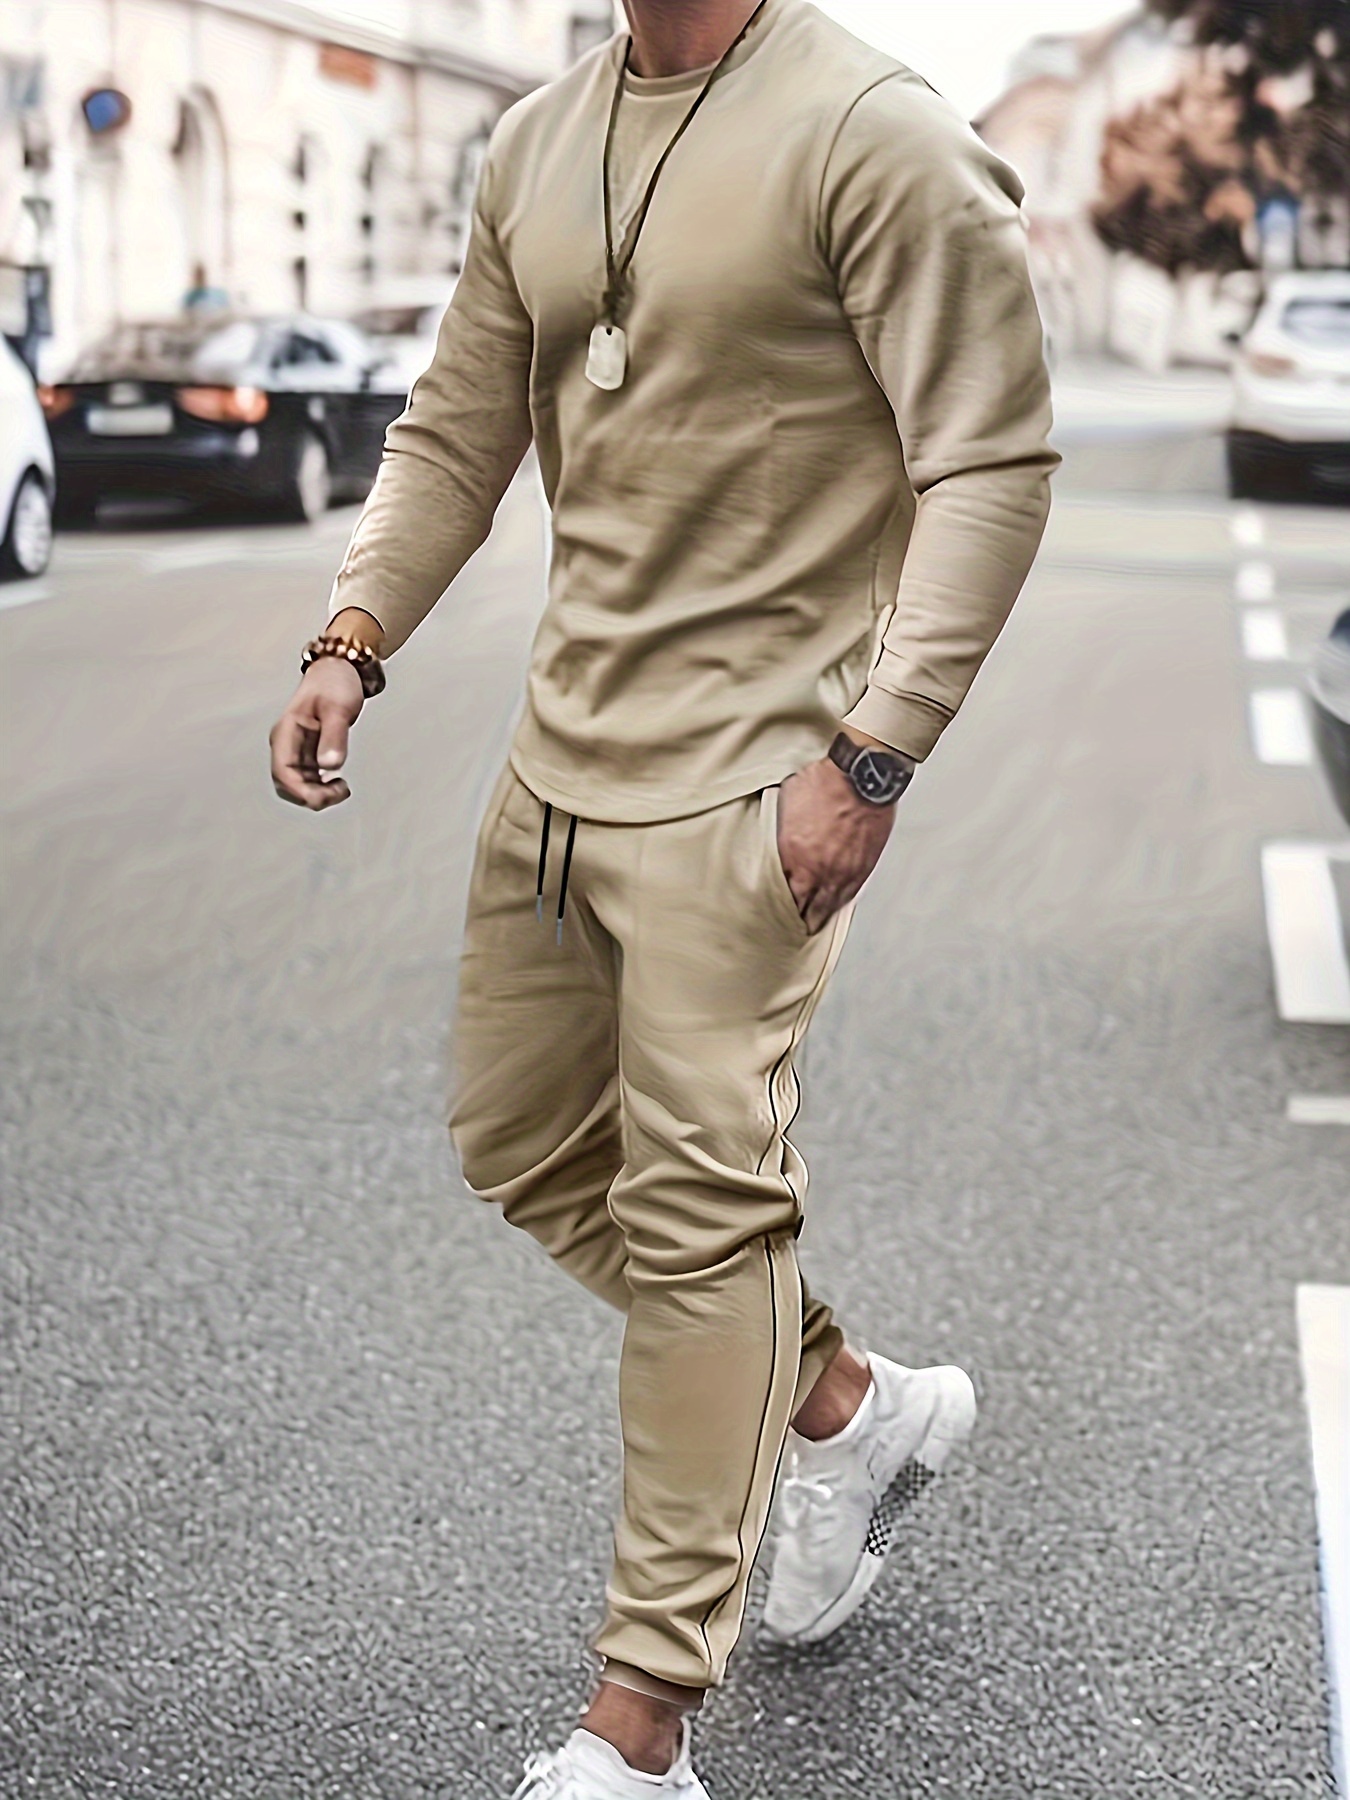 Men's Solid Color Long Sleeve Thermal Shirts Lightweight Thermal Underwear  Tops